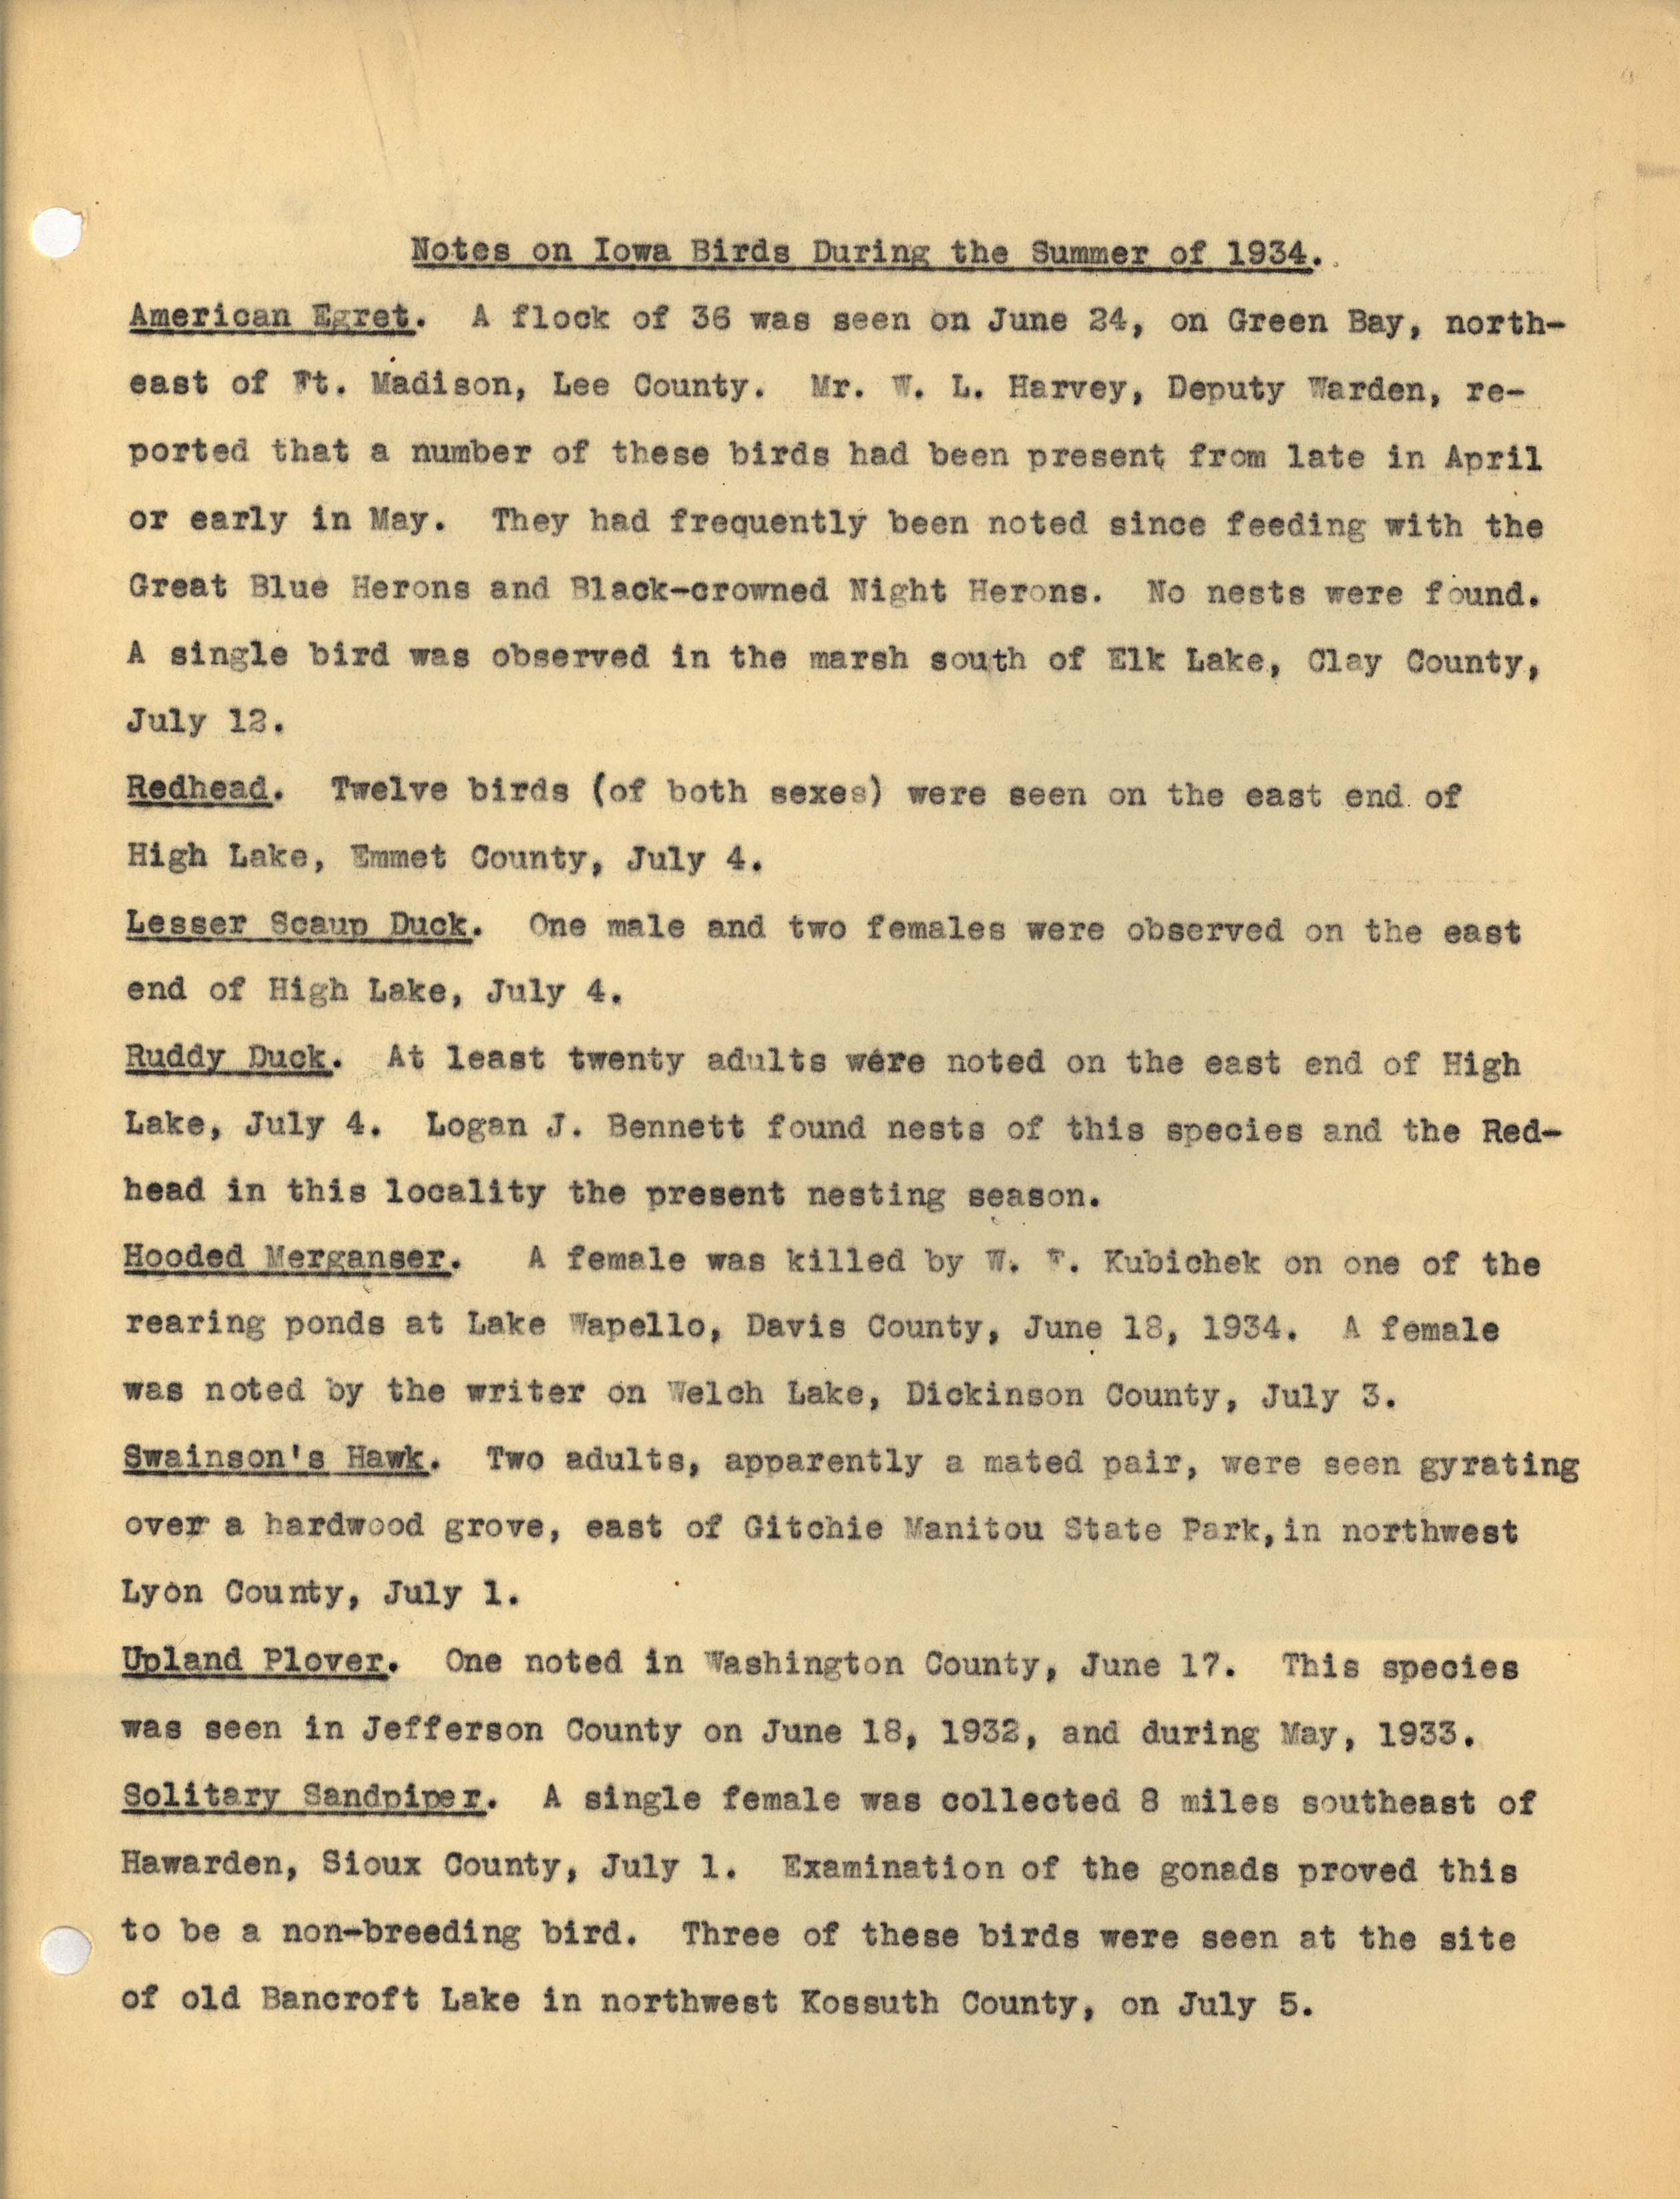 Notes on Iowa birds during the summer of 1934